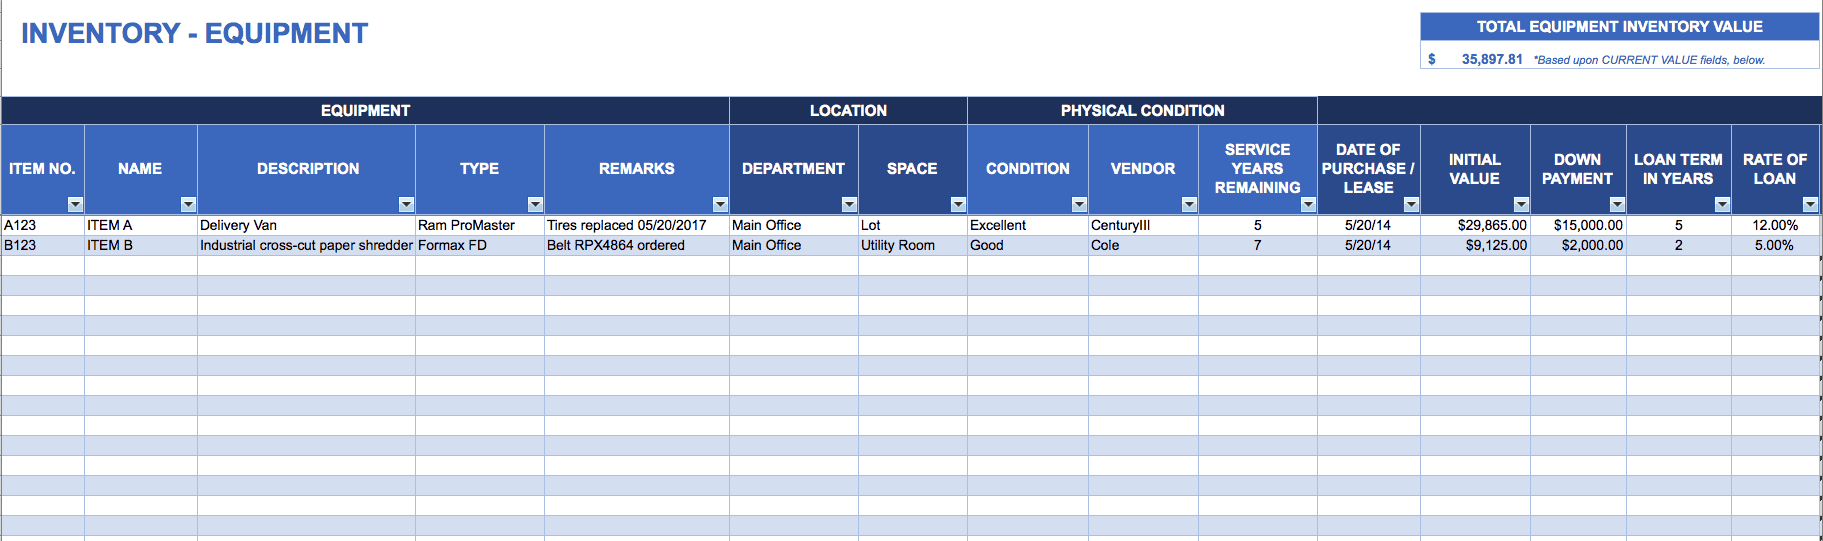 Equipment inventory template